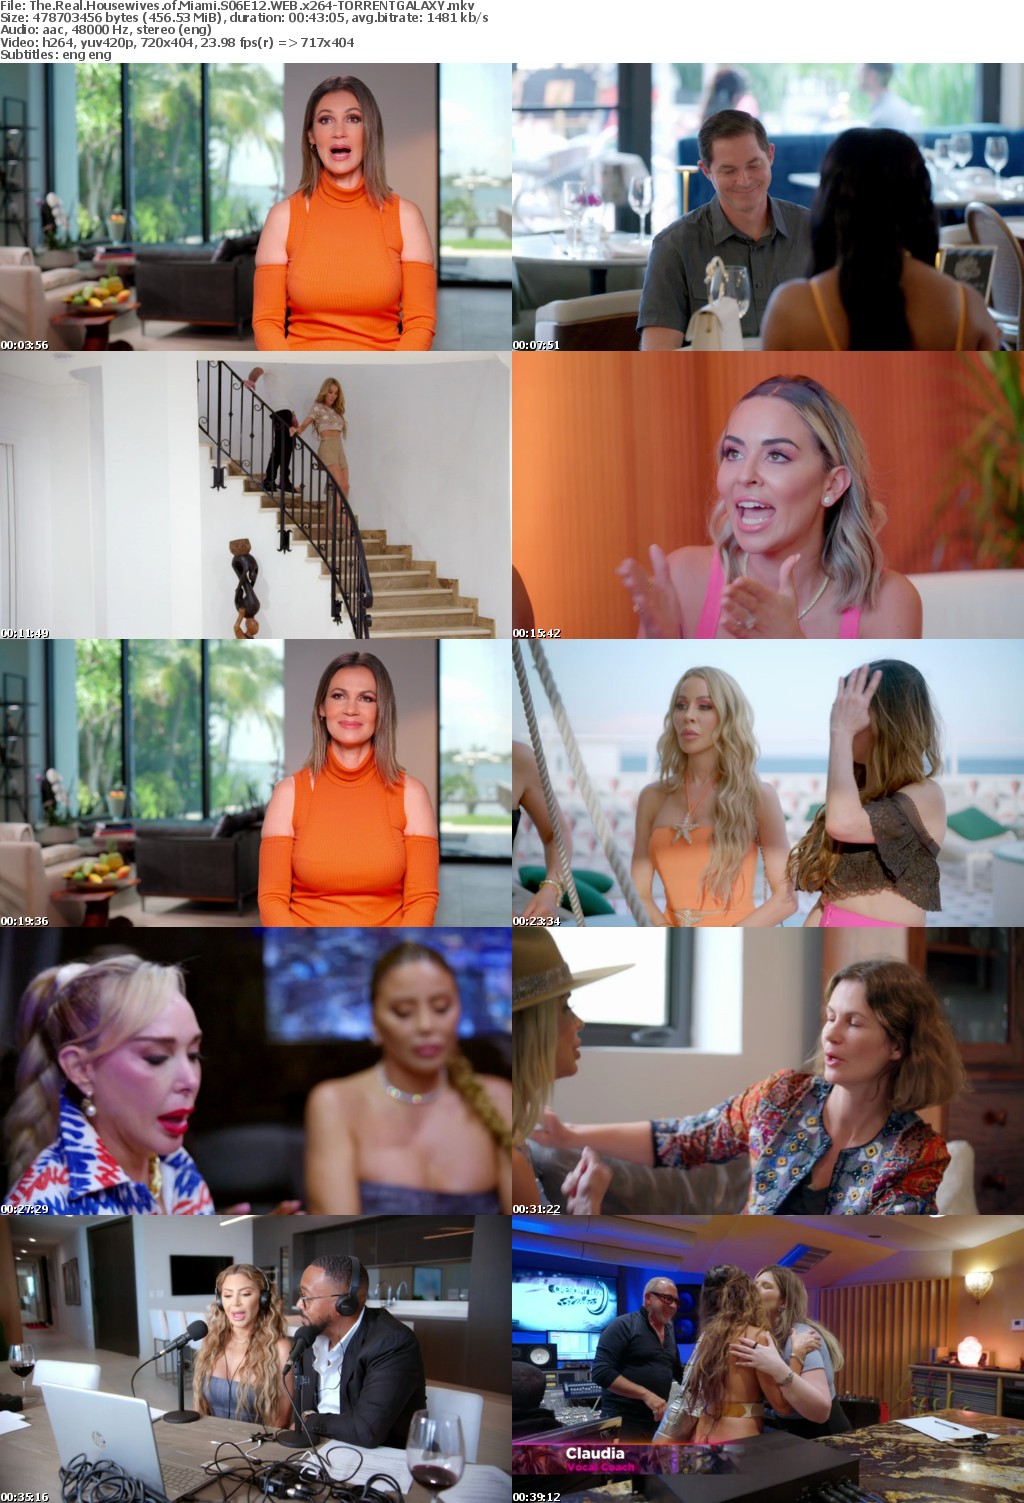 The Real Housewives of Miami S06E12 WEB x264-GALAXY